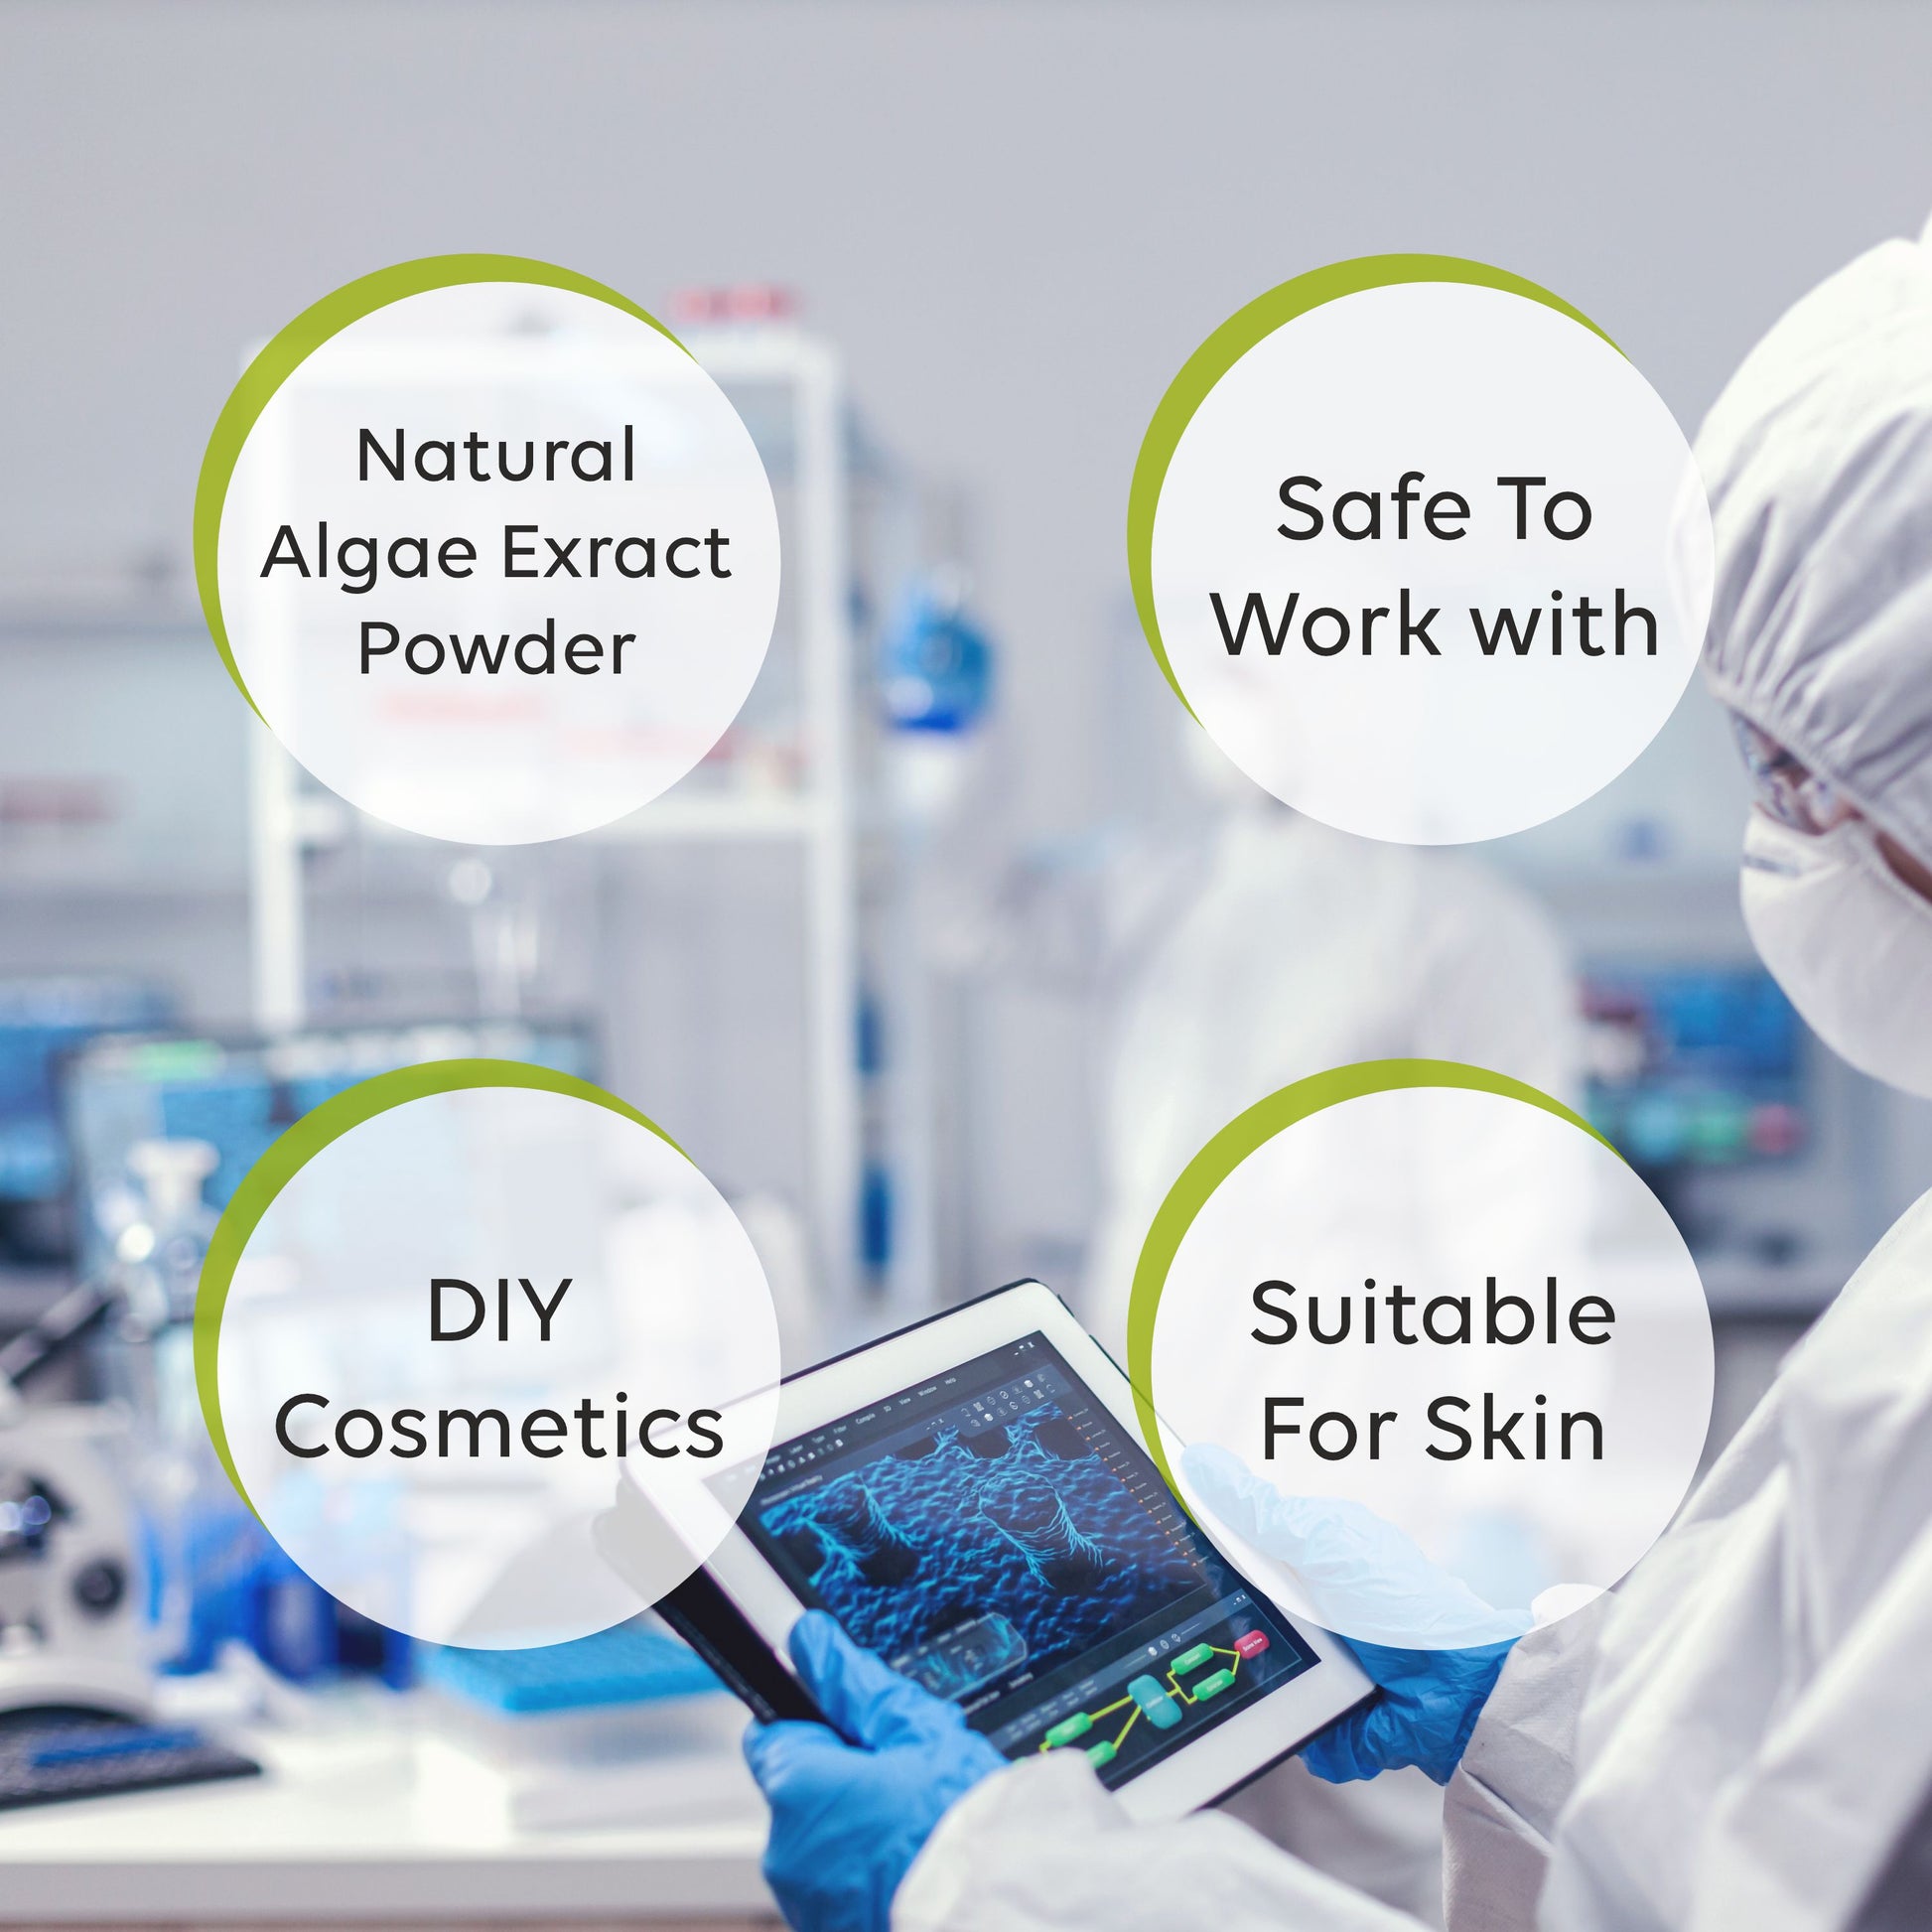 cosmeticmaking, saopmaking, cosmeticmakingingredients, soapmakingingredients,cosmeticingredients,naturalingredients,organicingredients,veganingredients, essentialoils,fragranceoils,carrieroils, carrieroils, butters, clays,botanicals,herbs,preservatives,emulsifiers,surfa ctants,thickeners, thickeners,exfoliants, algae extract